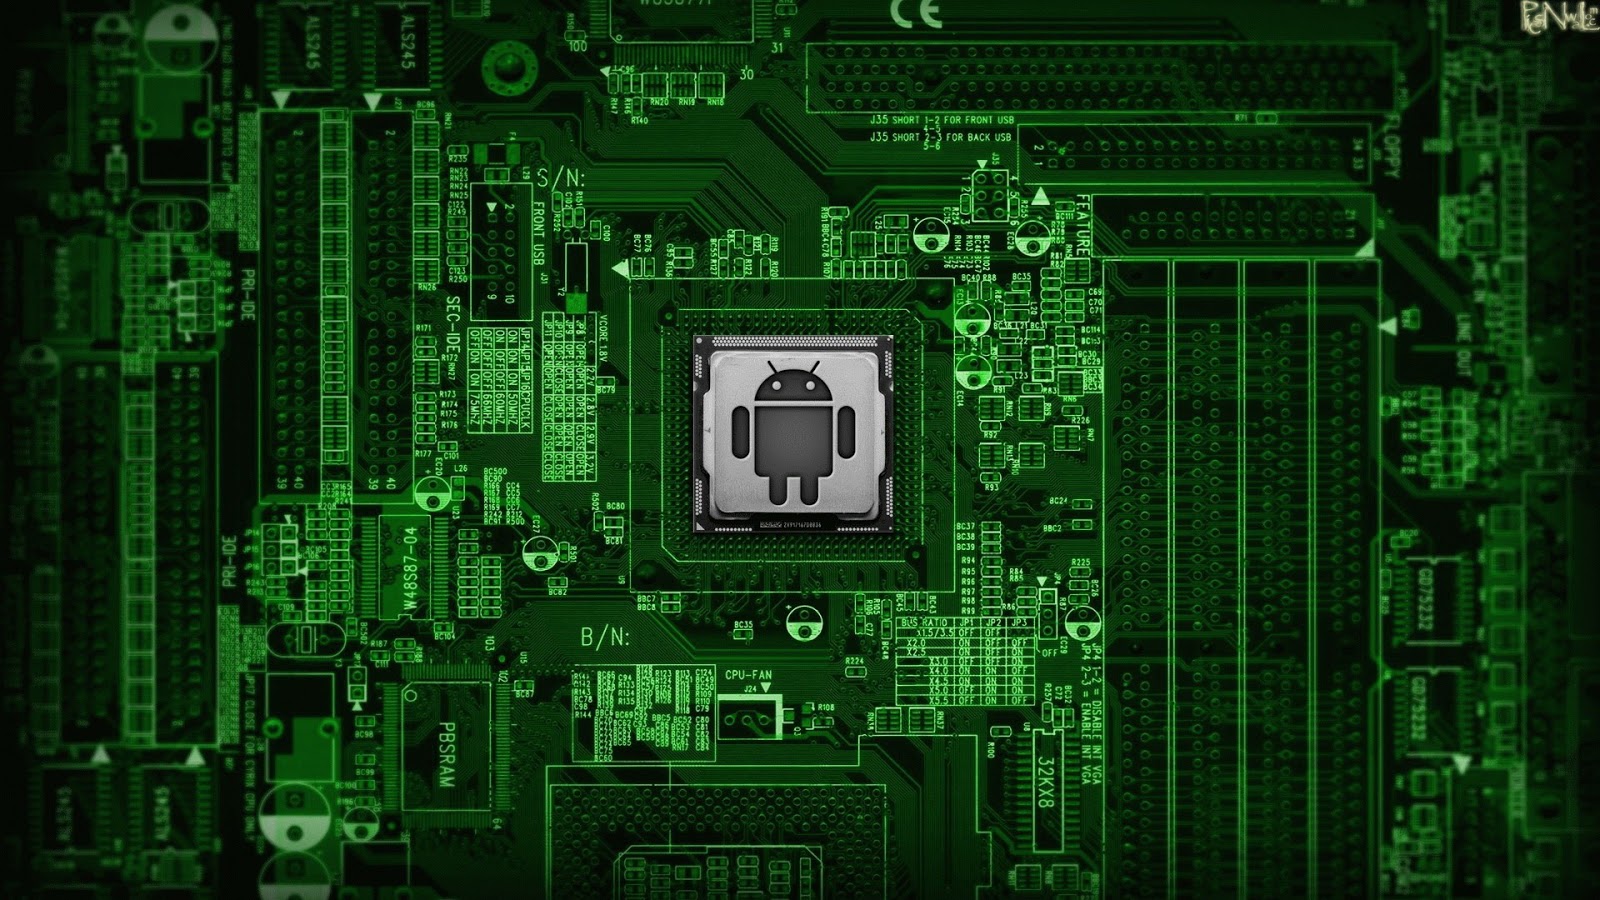 Green Android wallpaper